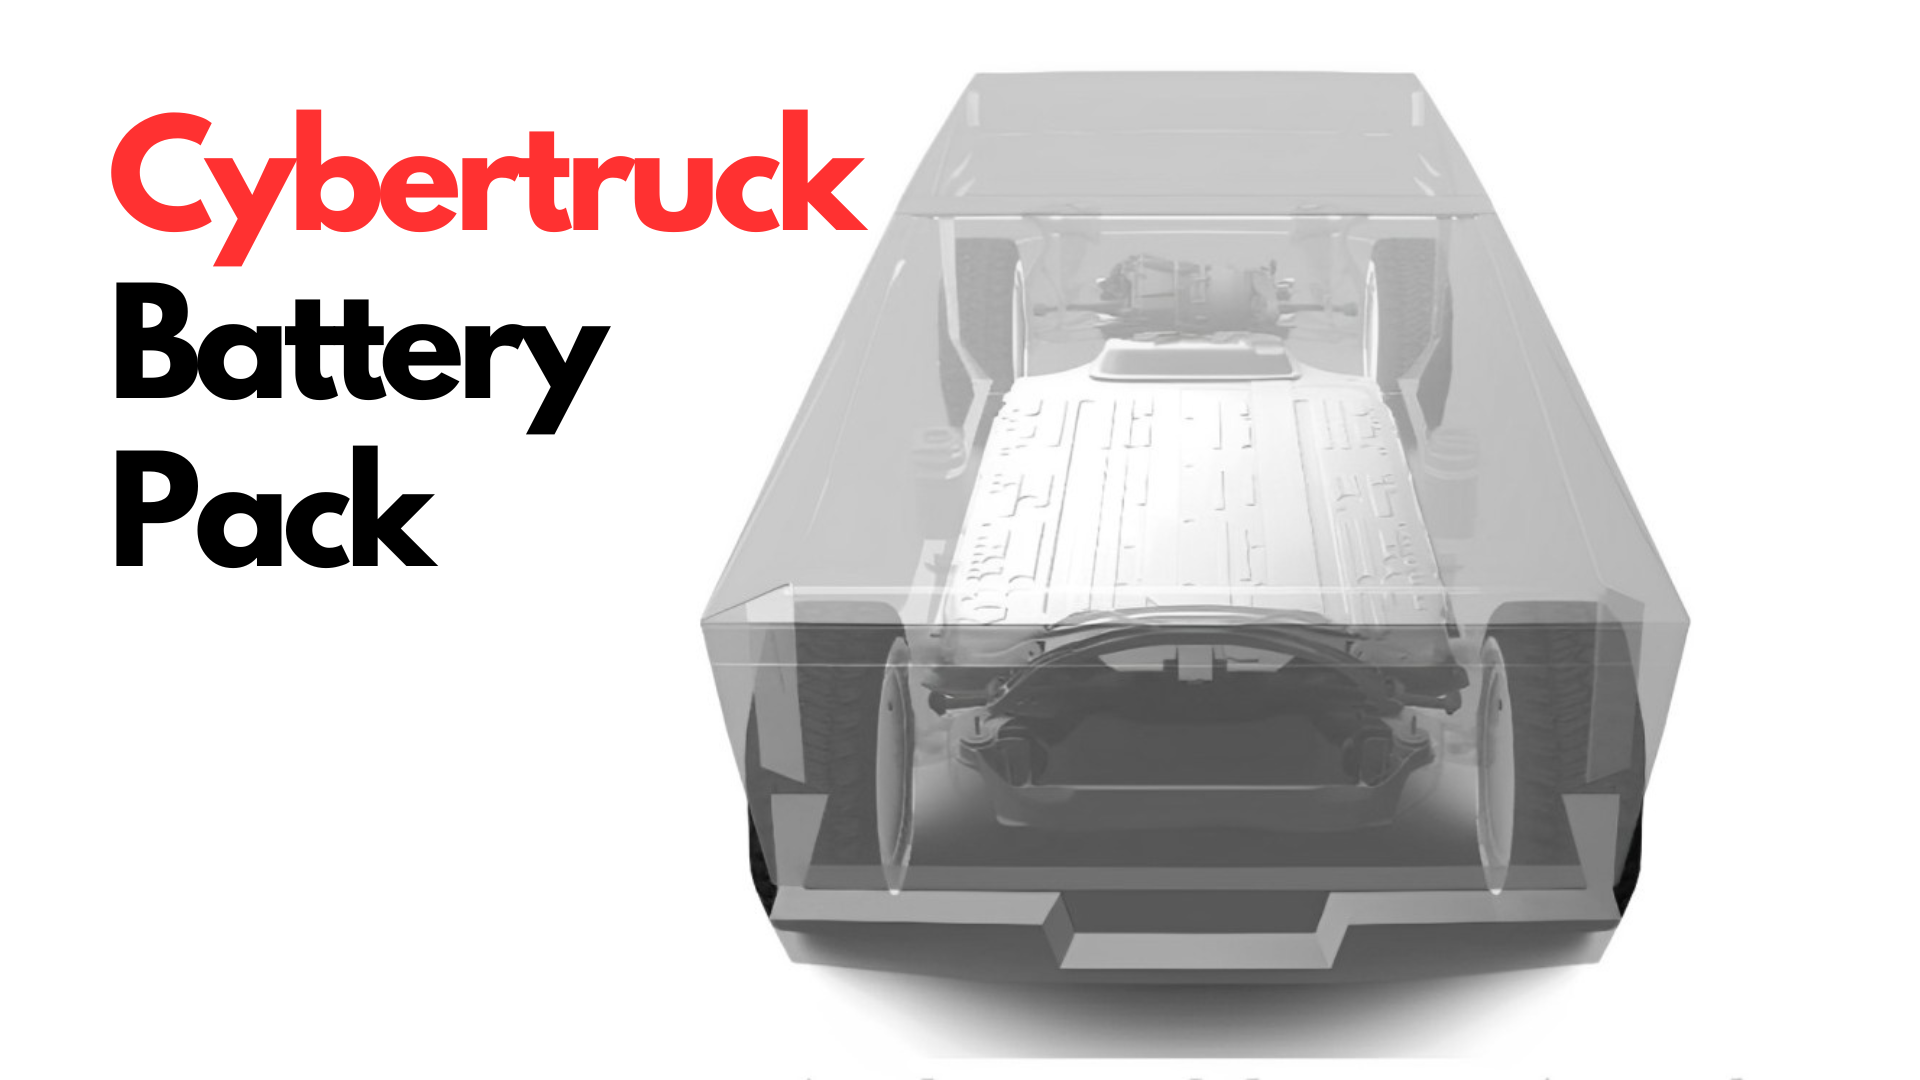 https://e-vehicleinfo.com/global/tesla-cybertruck-battery-pack-range-and-countdown-to-delivery/